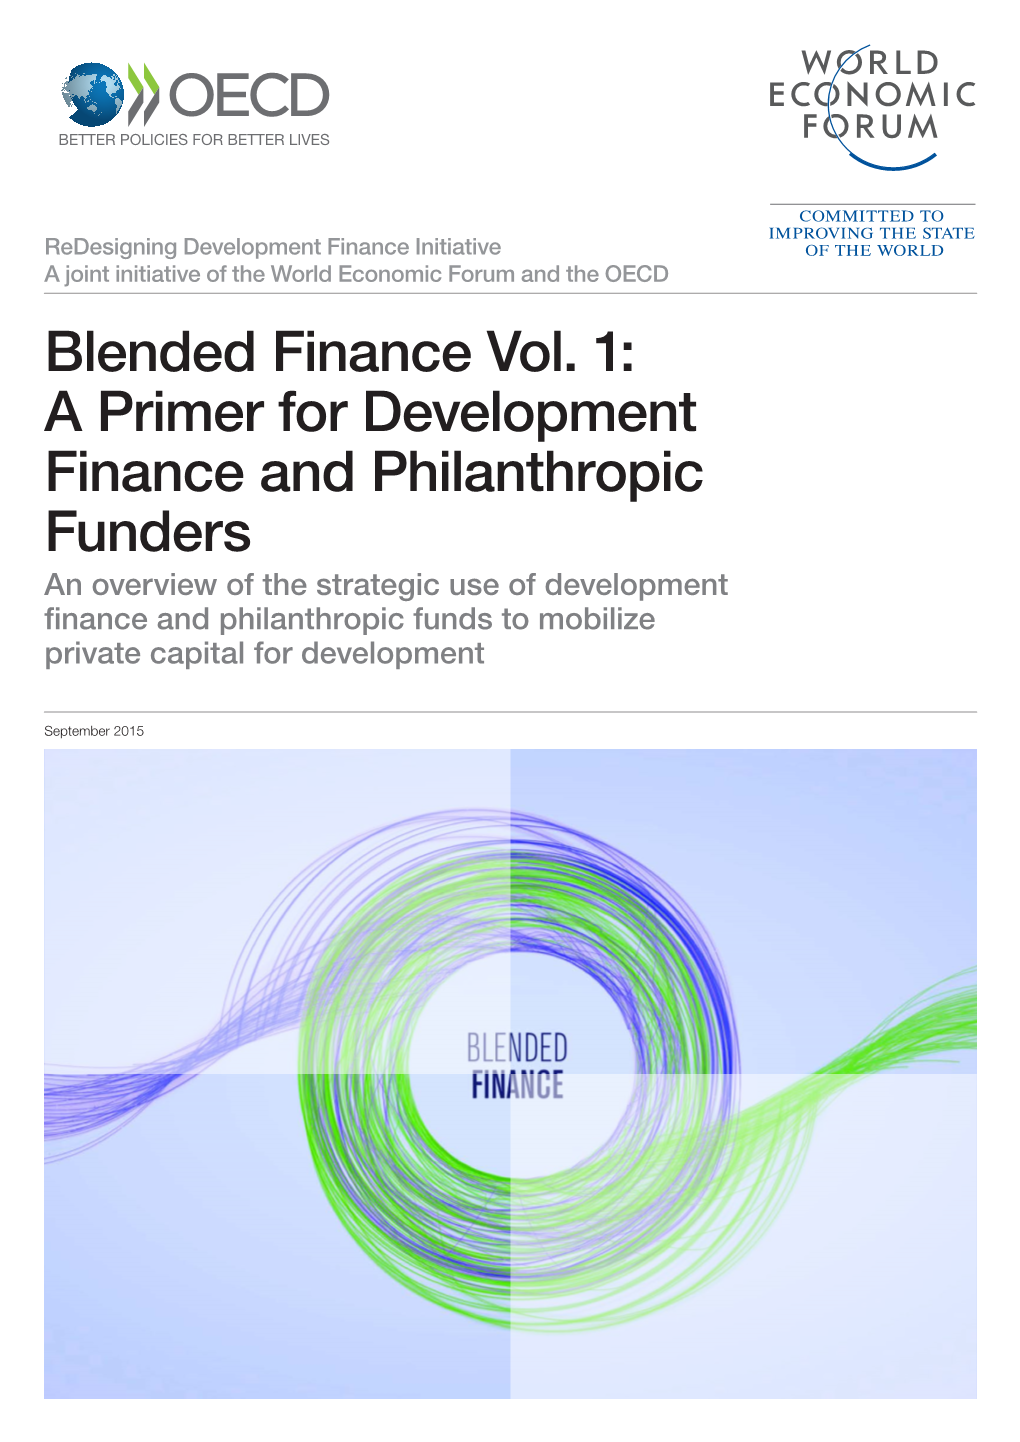 A Primer for Development Finance and Philanthropic Funders